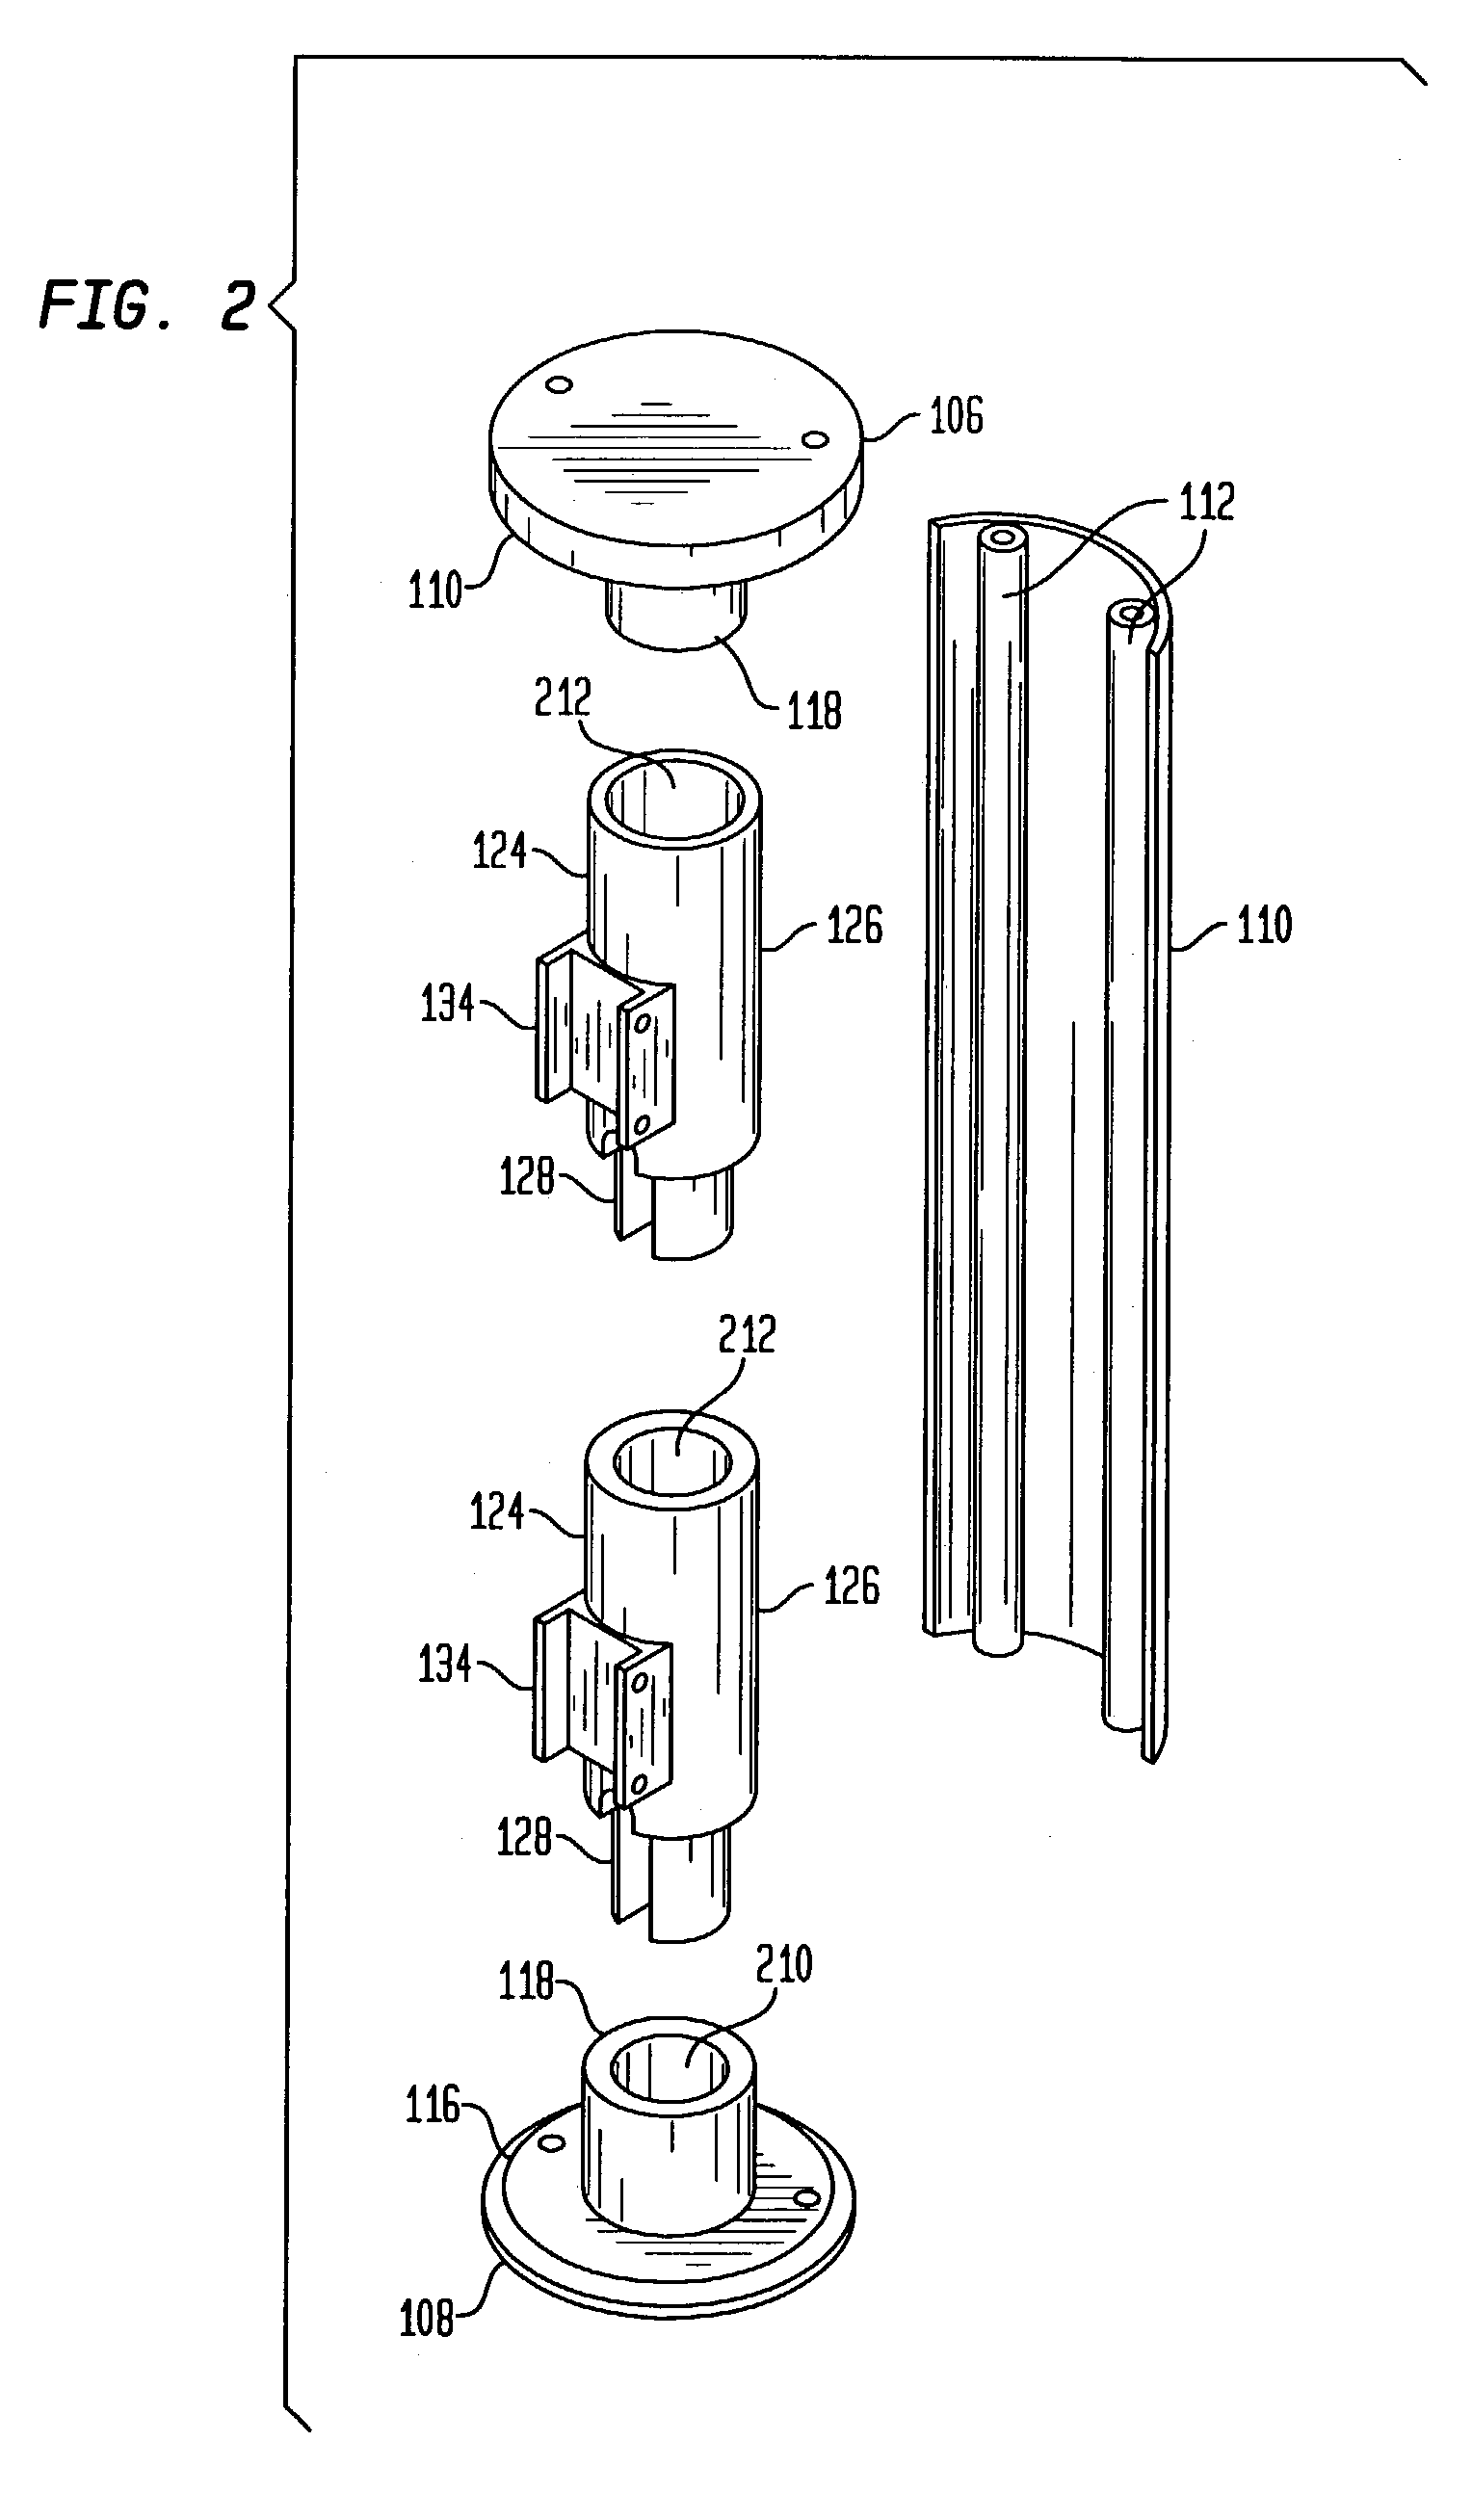 Stackable multiple support arm for electronic devices